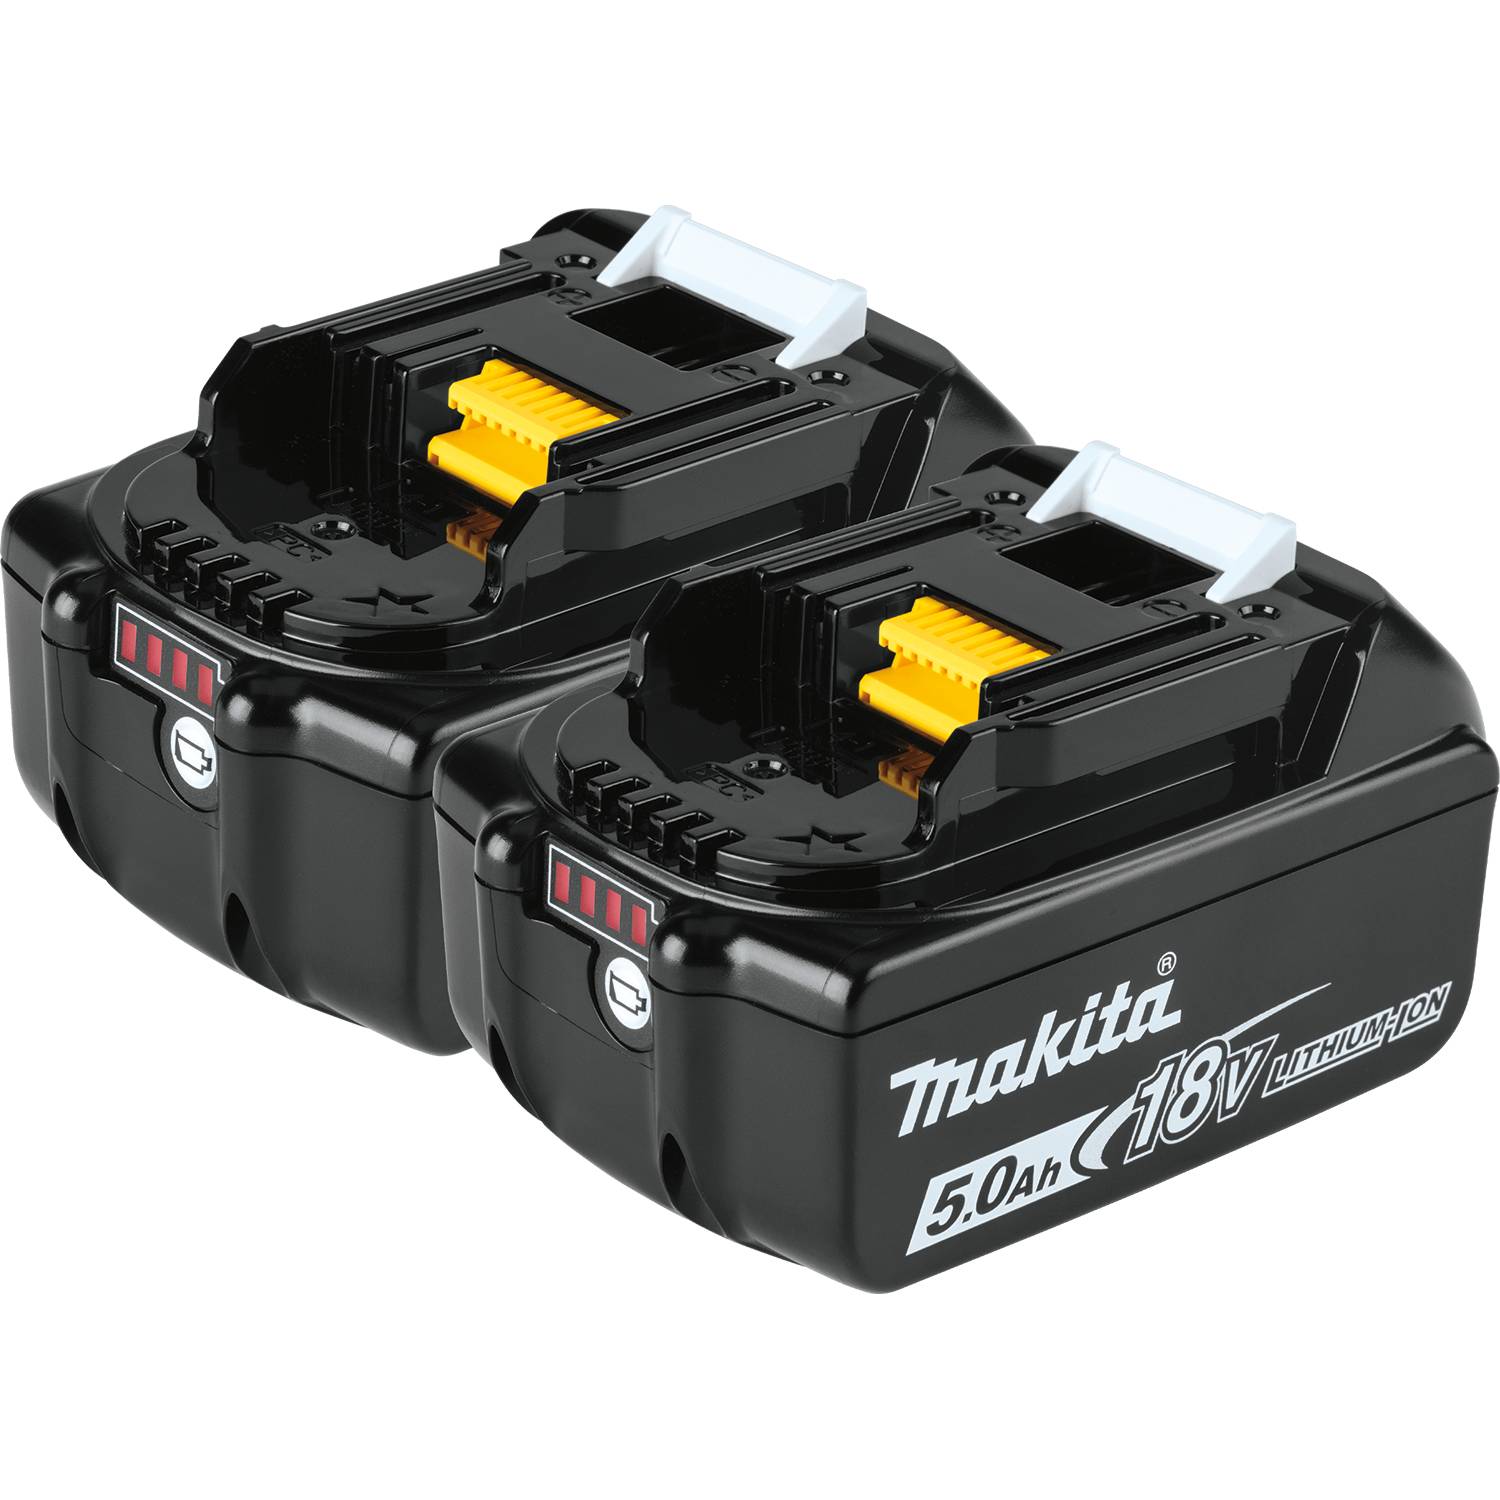  18V LXt Lithium‑Ion 5.0Ah Battery